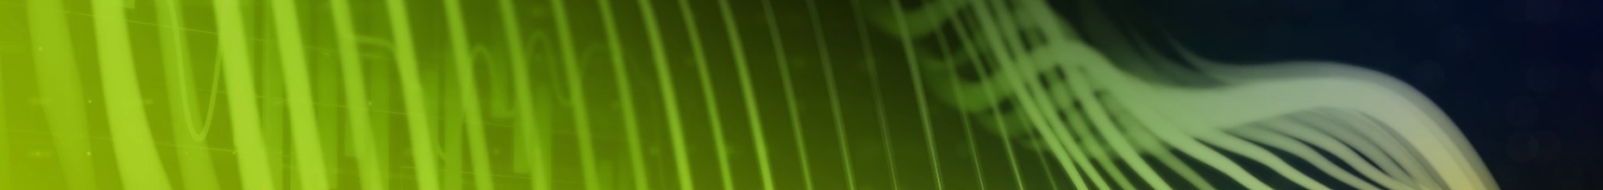 banner-image-report-2000X700.png